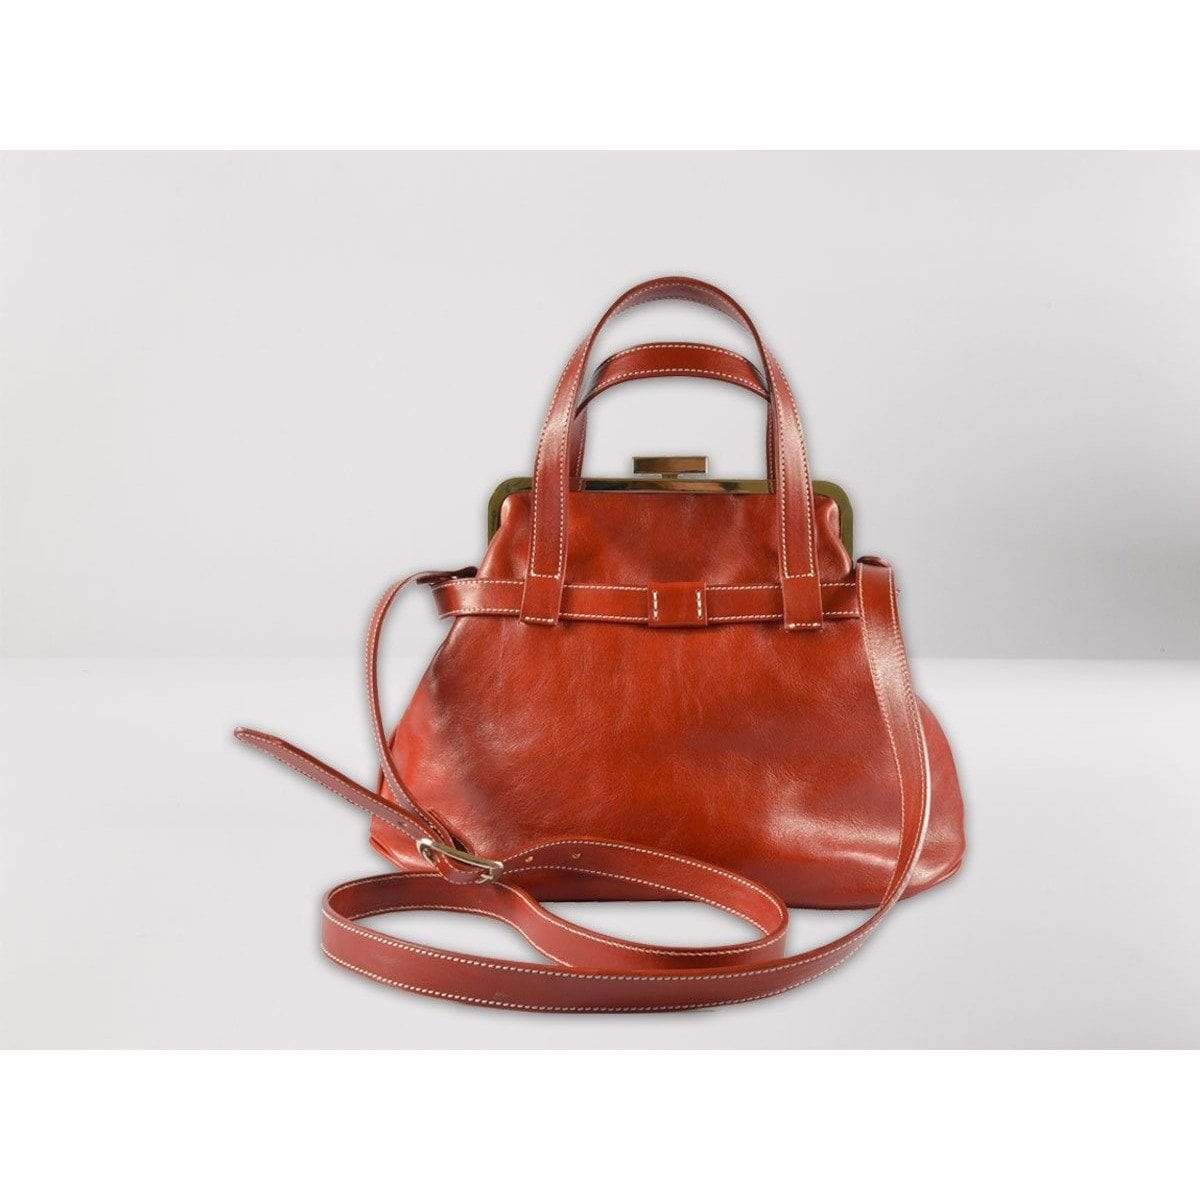 Constancia Made in Italy Women Shopping and Shoulder Bag